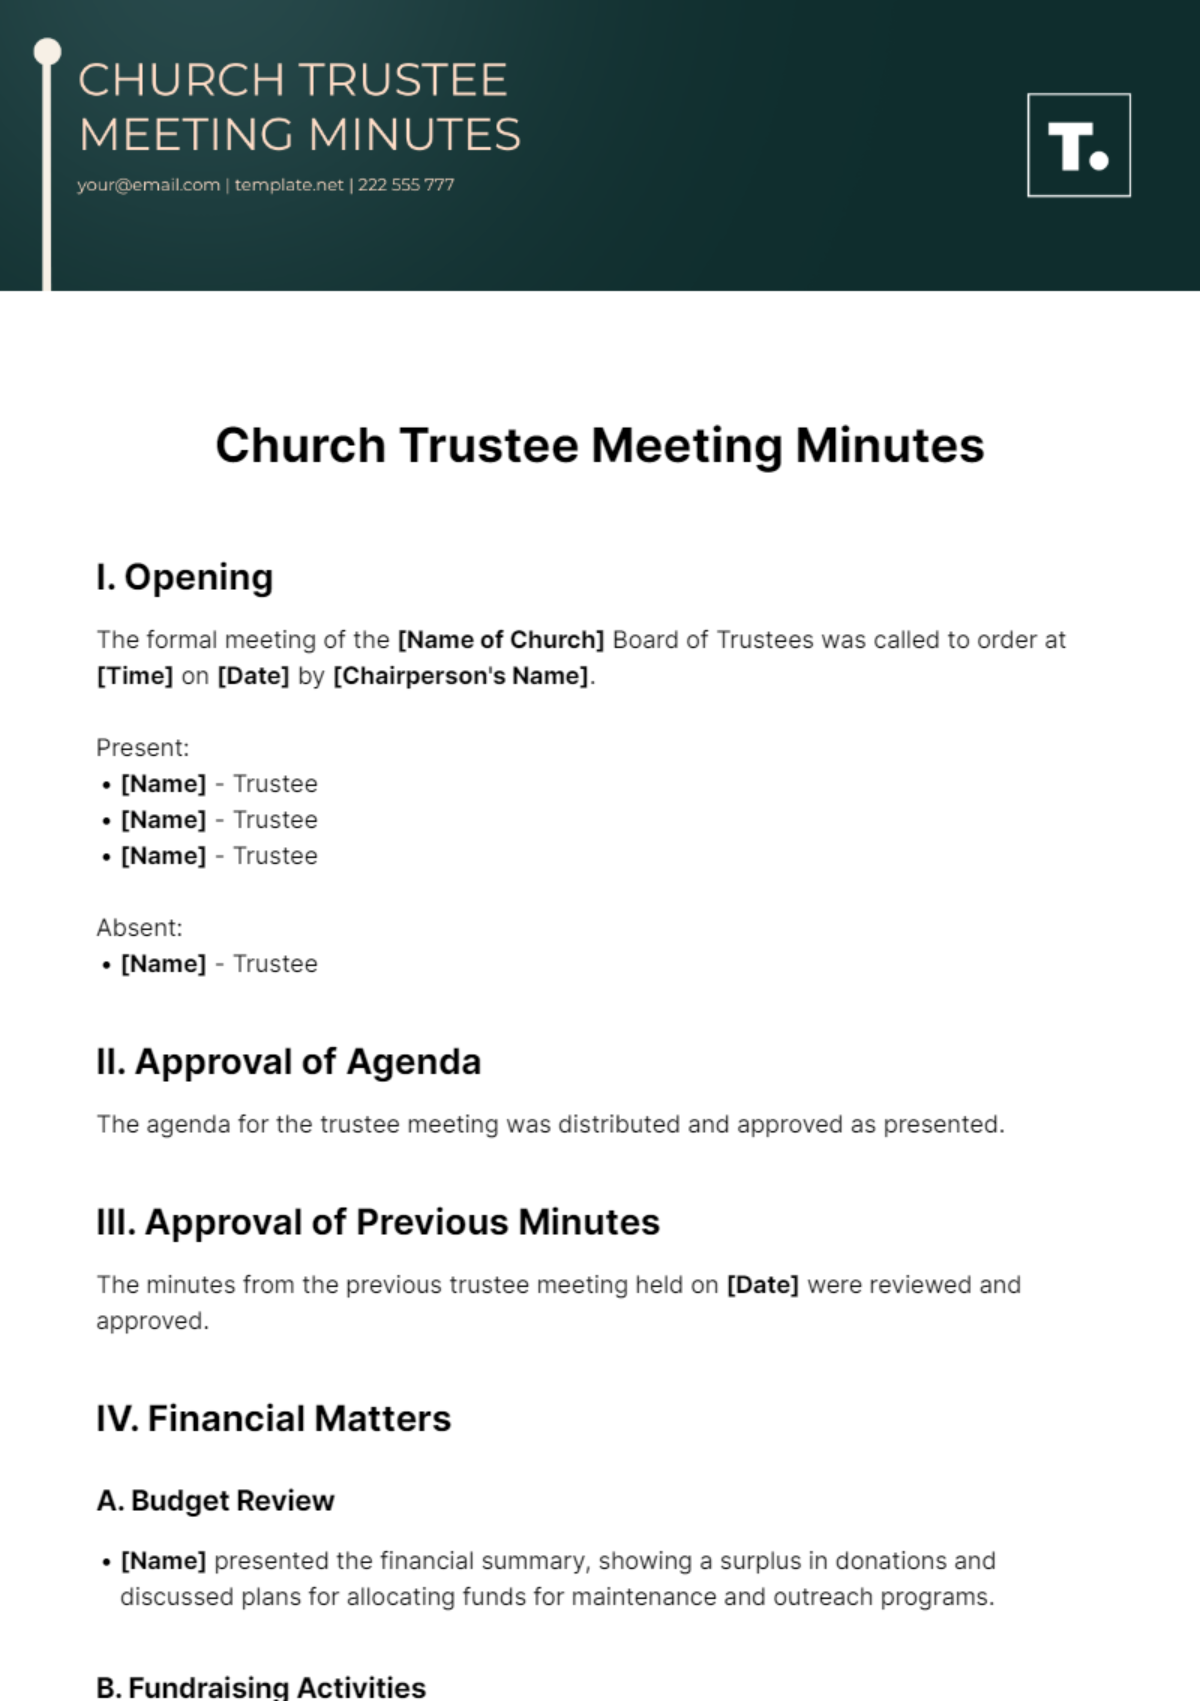 Church Trustee Meeting Minutes Template